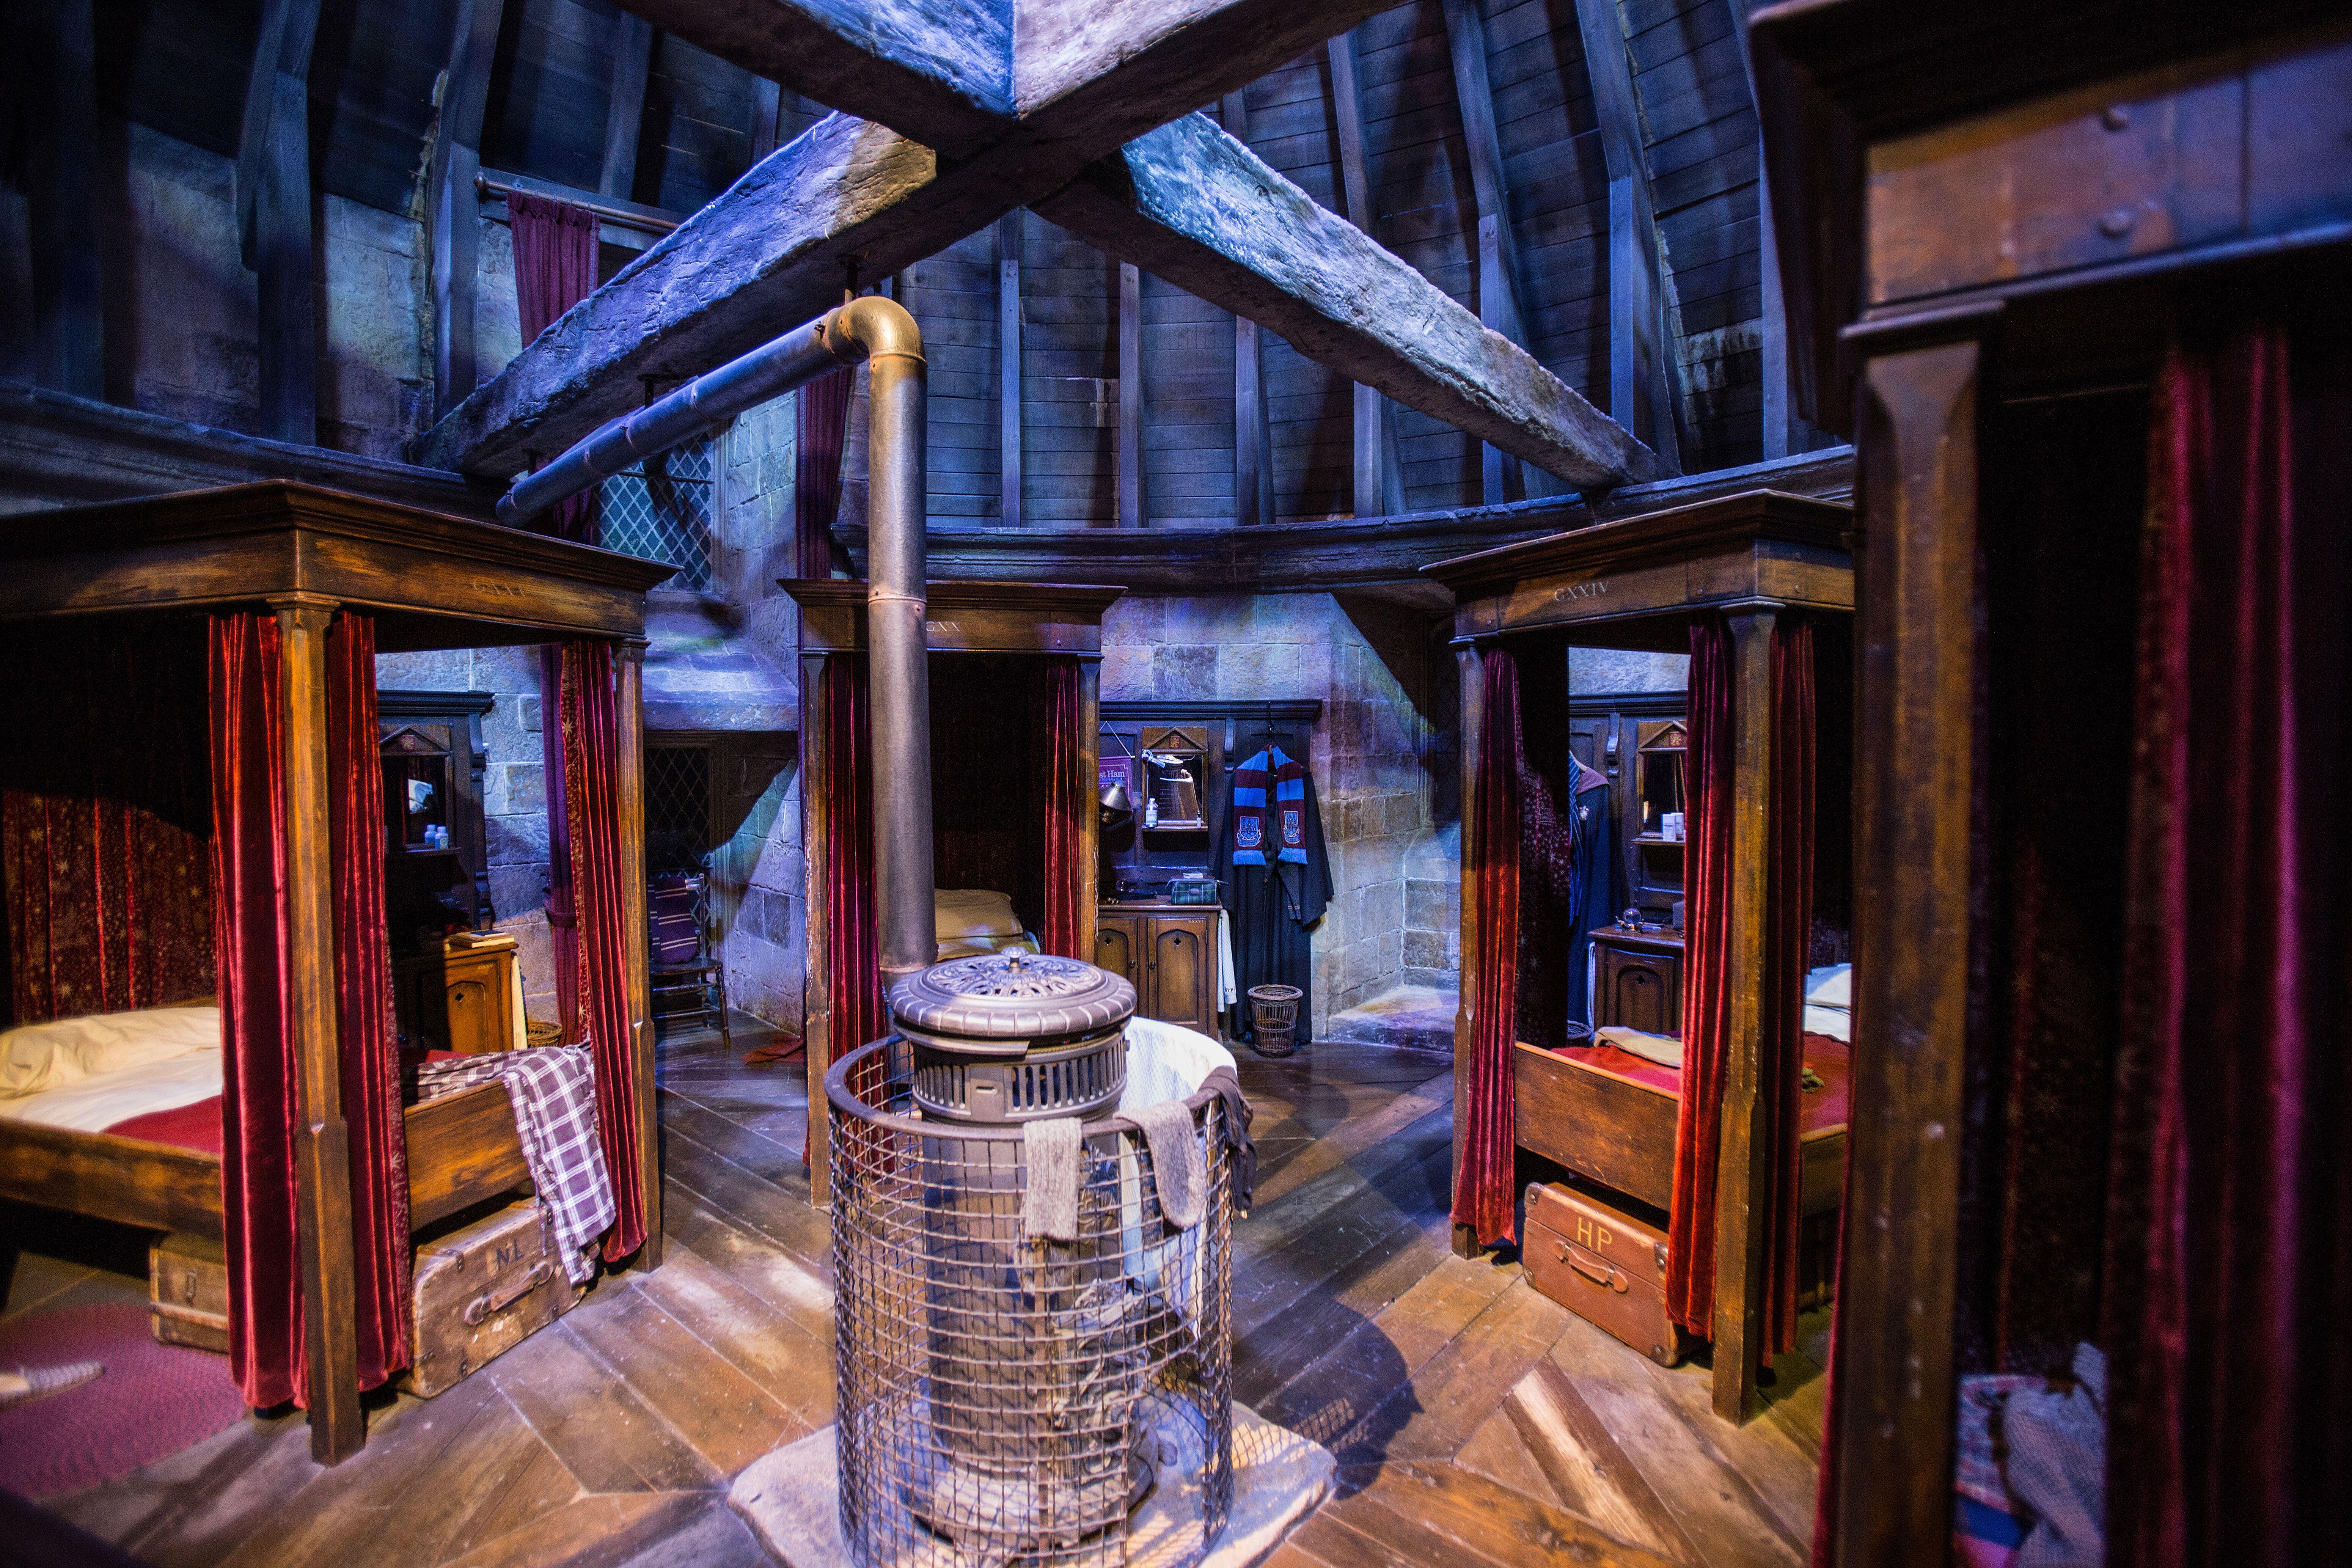 There are loads of sets to explore including the Gryffindor Boys' Dormitory